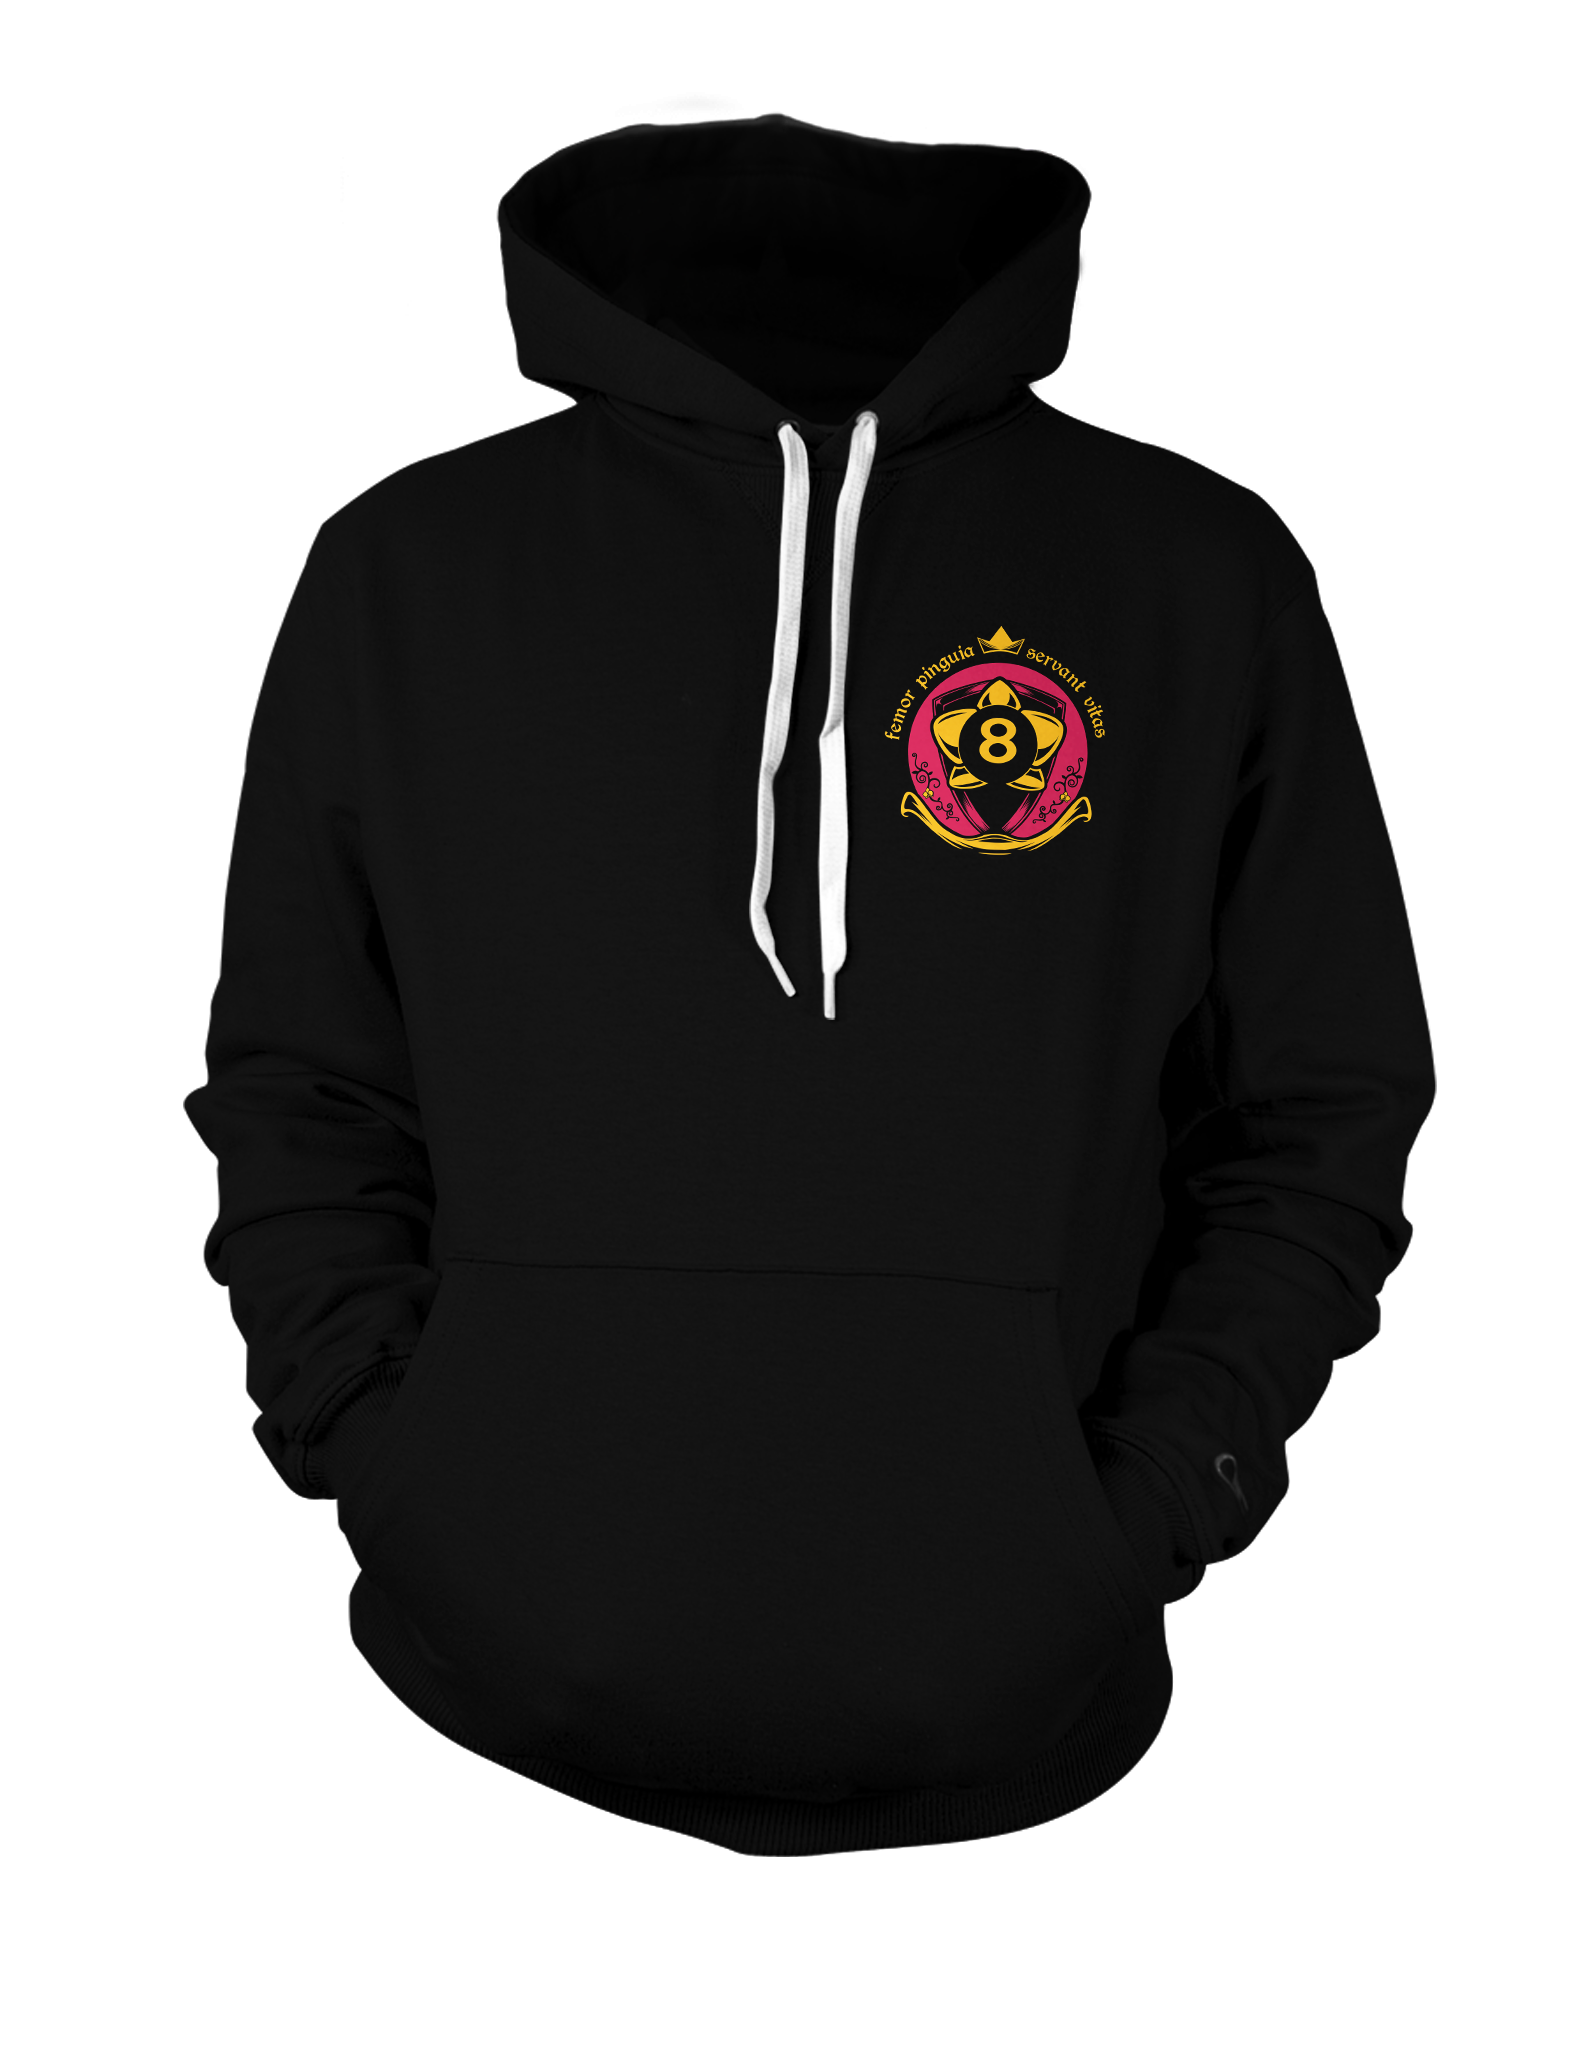 The Crest Hoodie – Orchideight